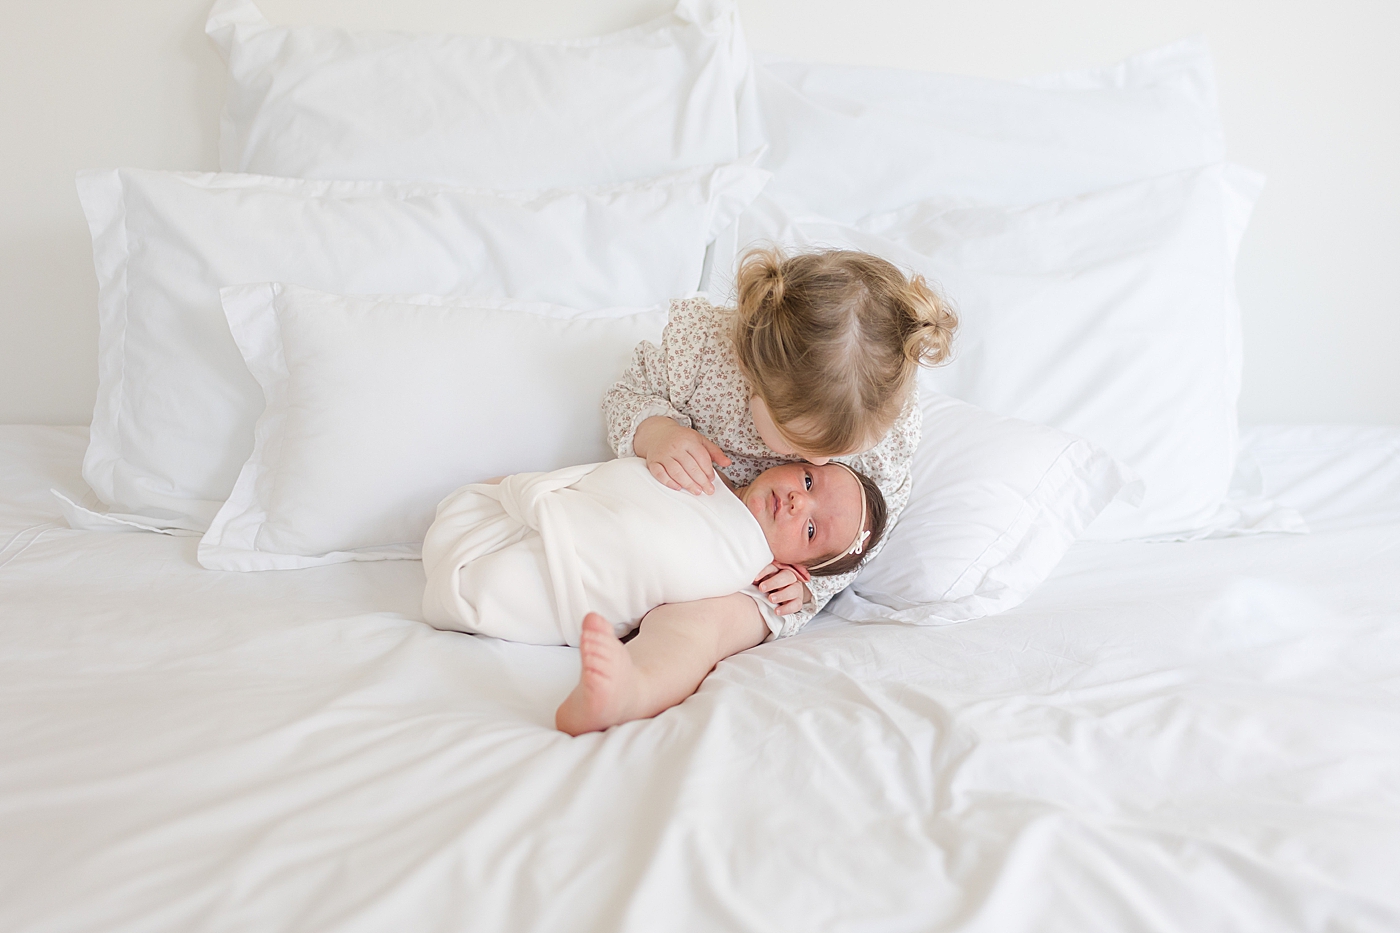 Big sister holding her newborn baby sister | Image by Emily Gerald Photography